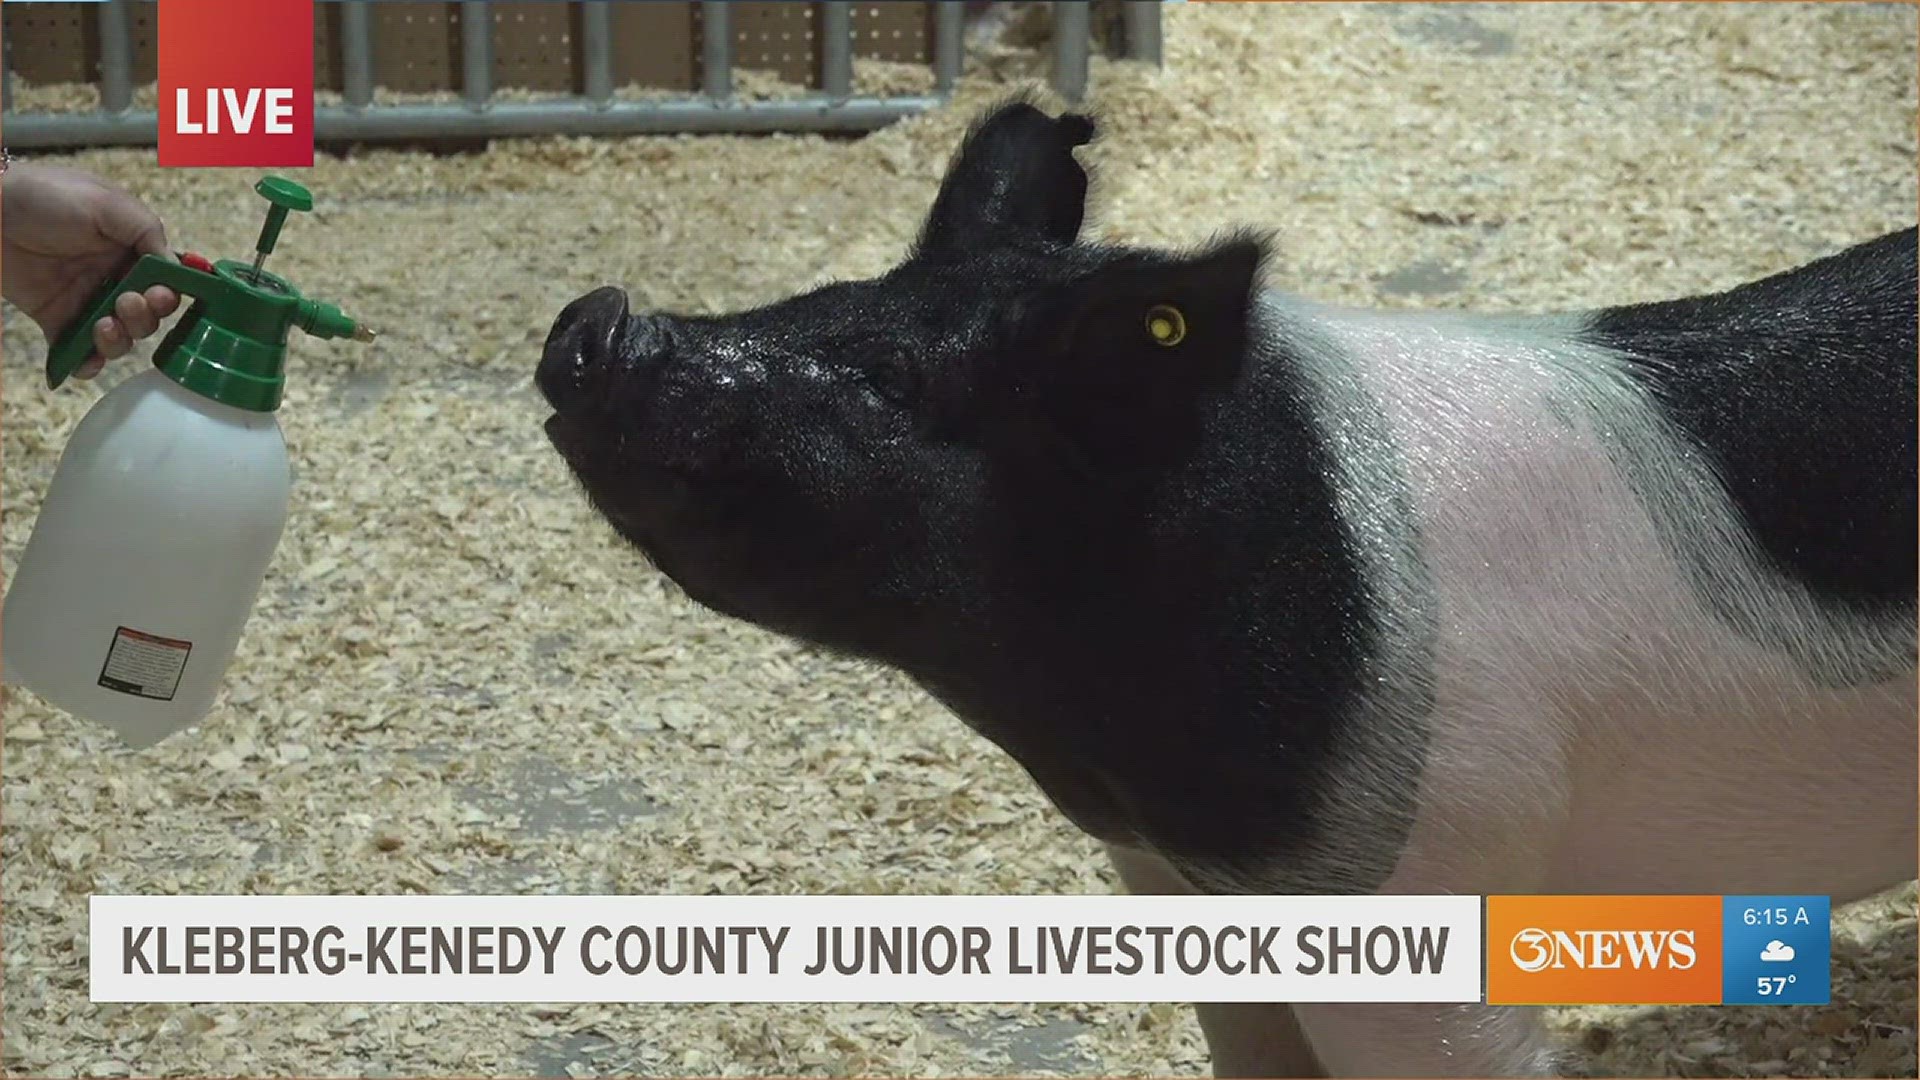 The show promotes agriculture & supports the students of Kleberg-Kenedy County. This students says it teaches life skills & helps create amazing memories.